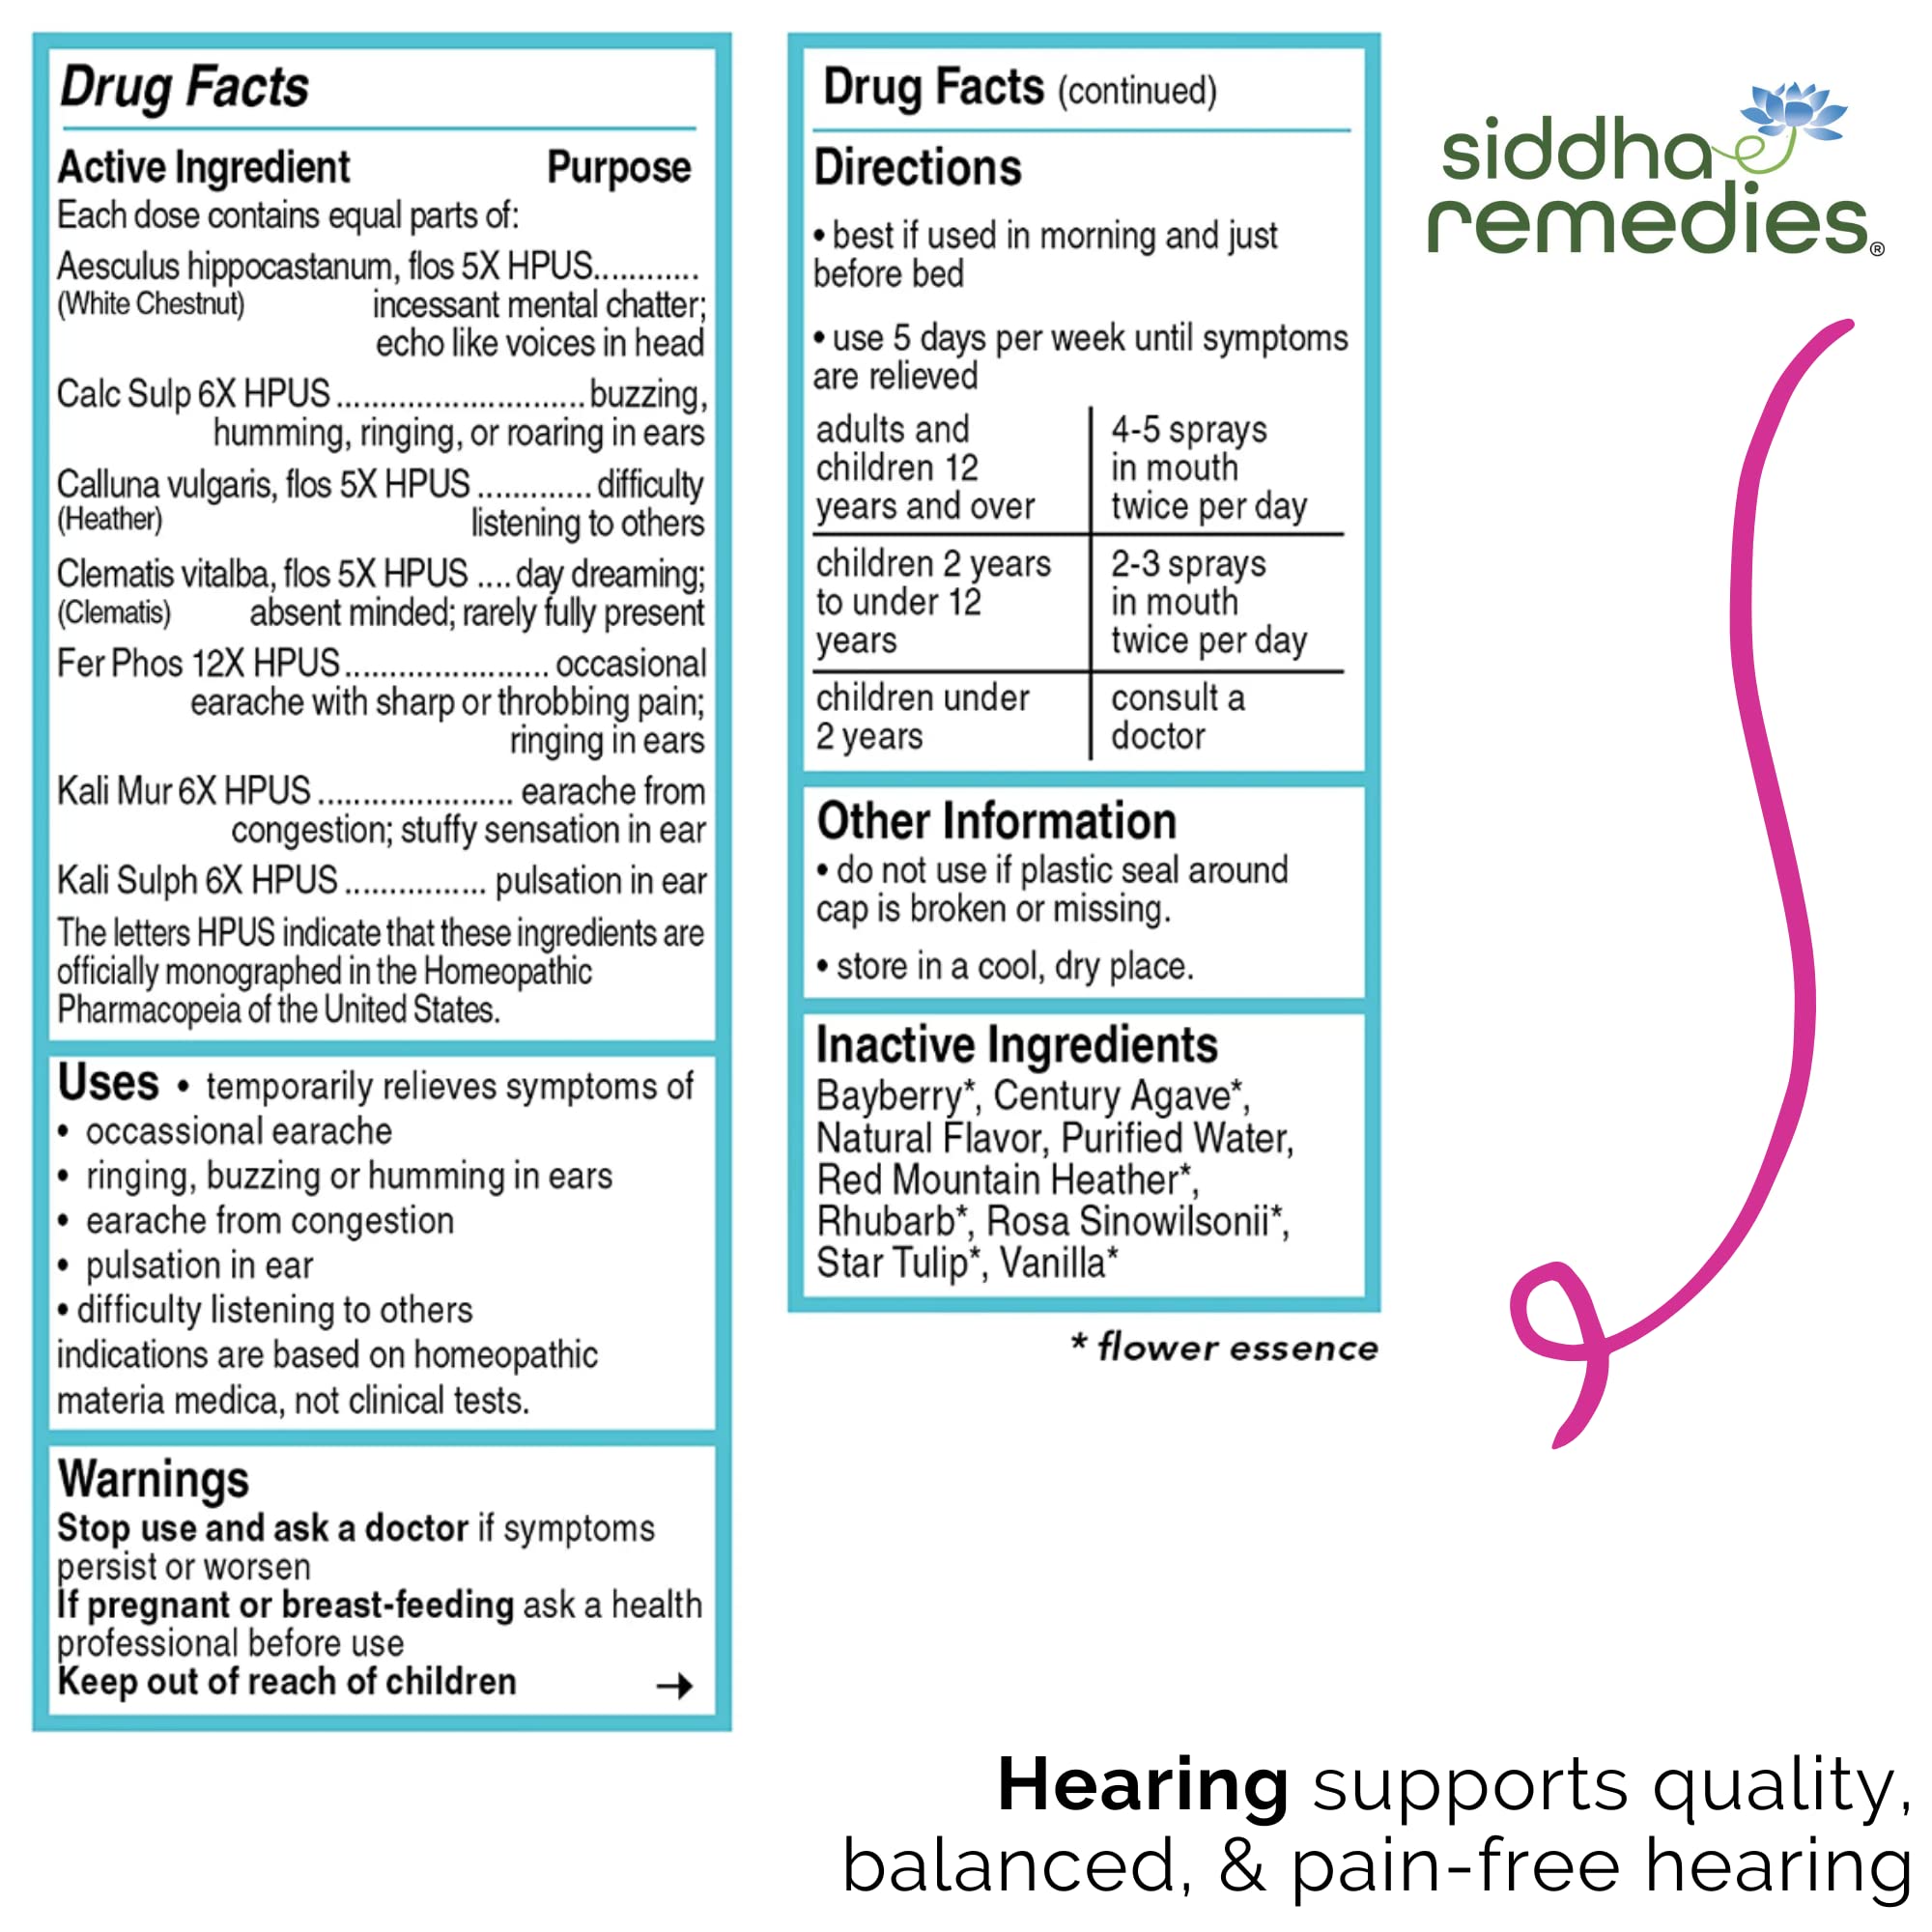 Siddha Remedies Hearing | Ear Ache Medicine for Adult Ear Pain | Homeopathic Medicine for Earache, Ear Ringing, Difficulty Listening & Buzzing in Ear | Non GMO, Alcohol, Gluten, and Sugar Free